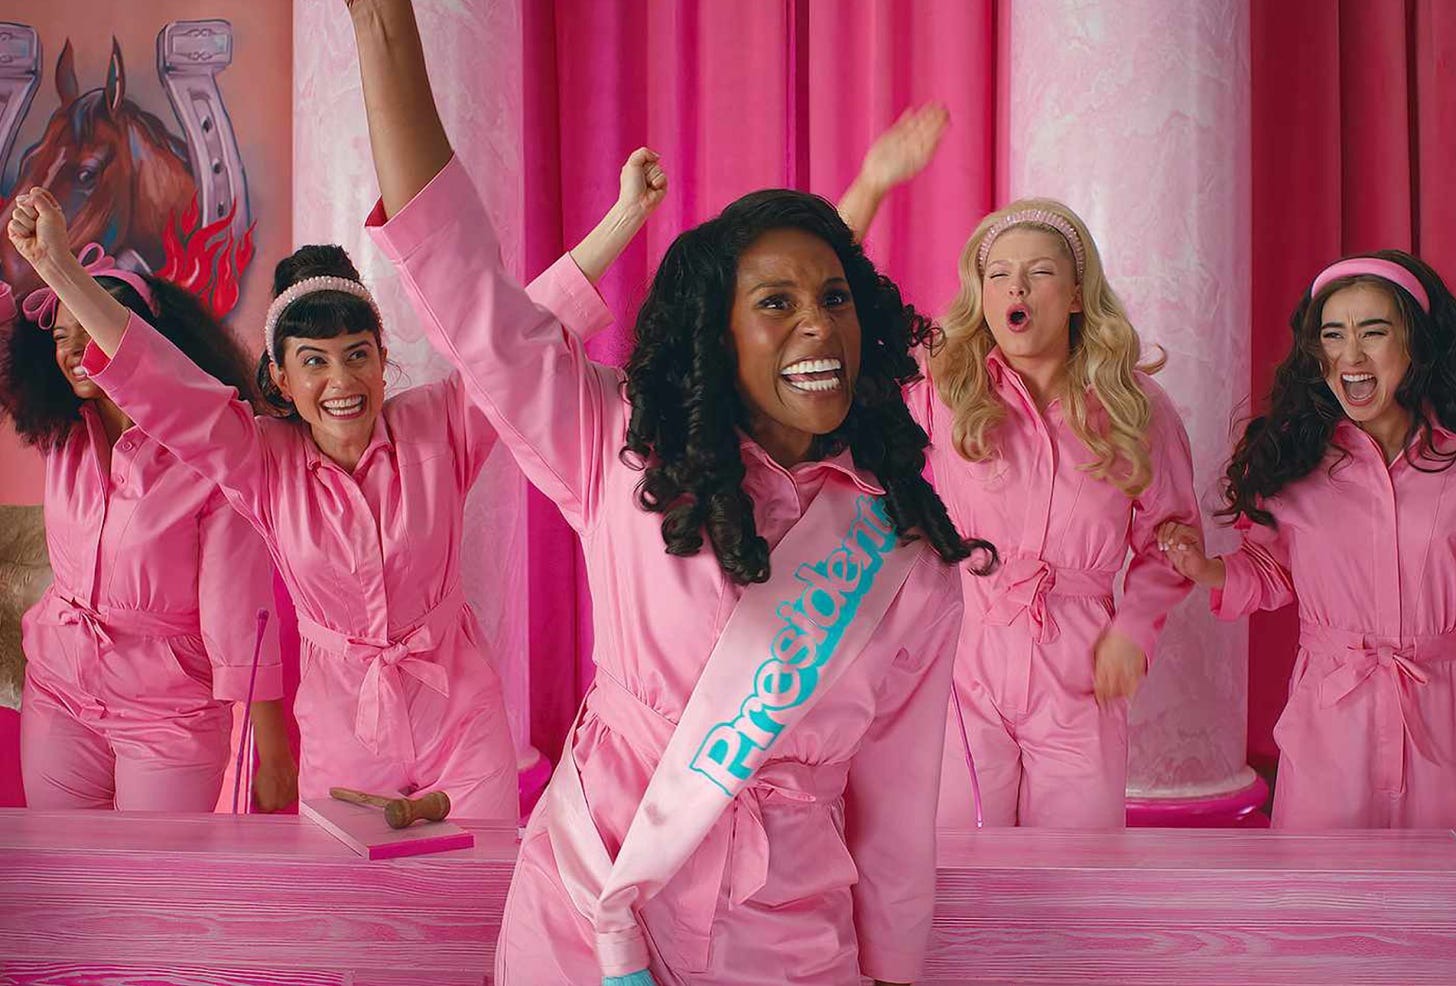 Issa Rae as President Barbie, wearing a pink jumpsuit and sash, raising her arm and cheering while other Barbies cheer behind her